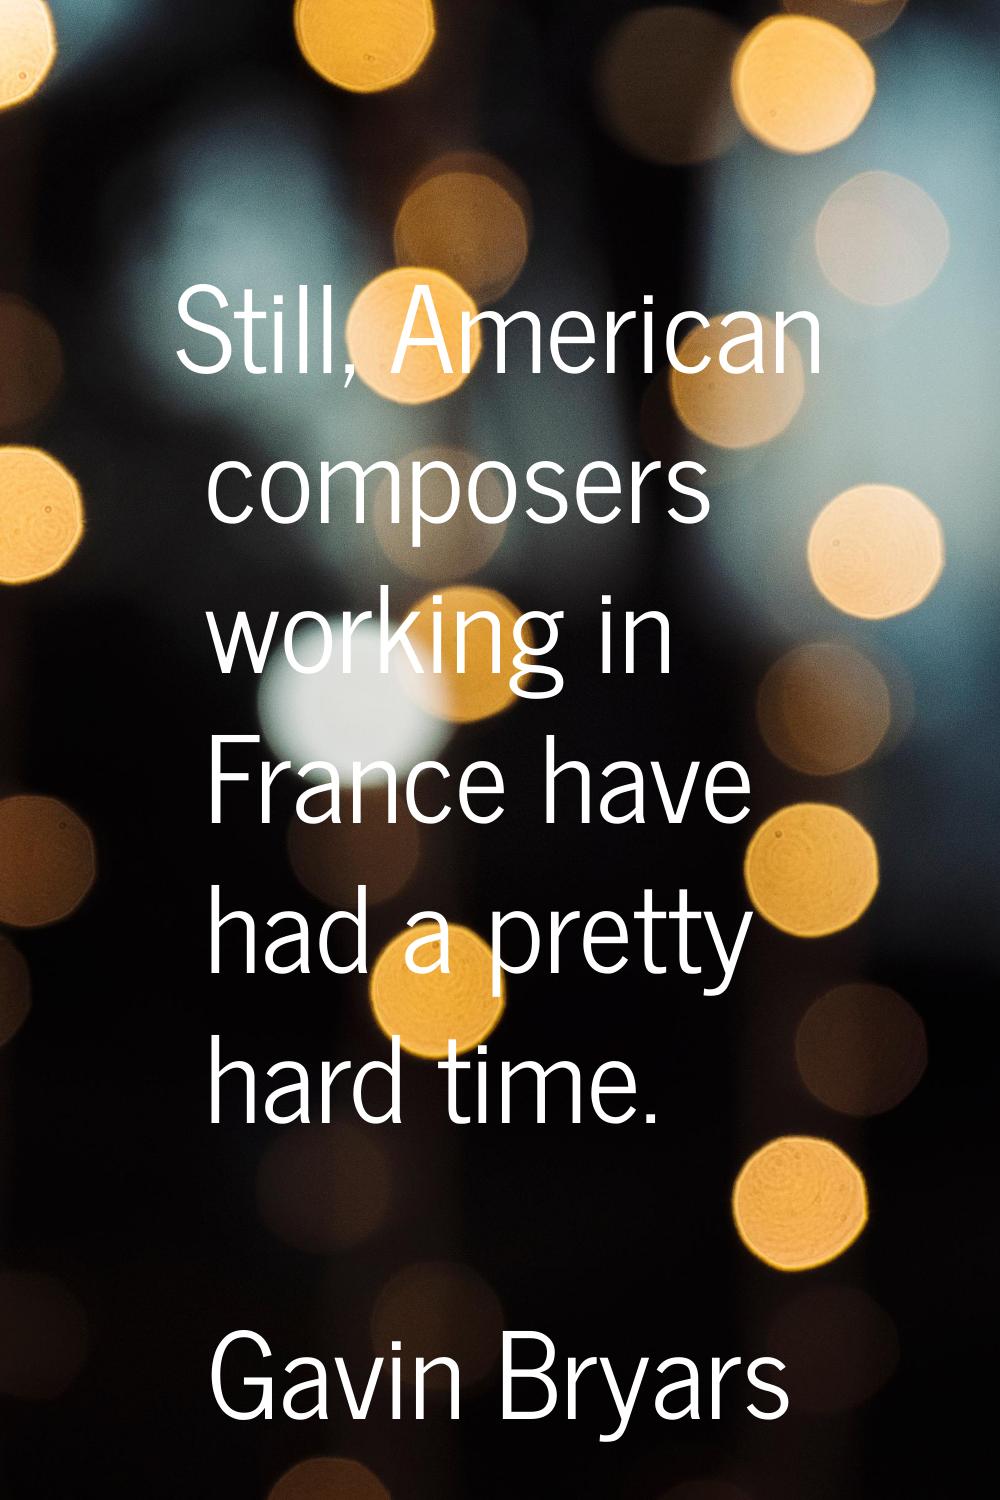 Still, American composers working in France have had a pretty hard time.